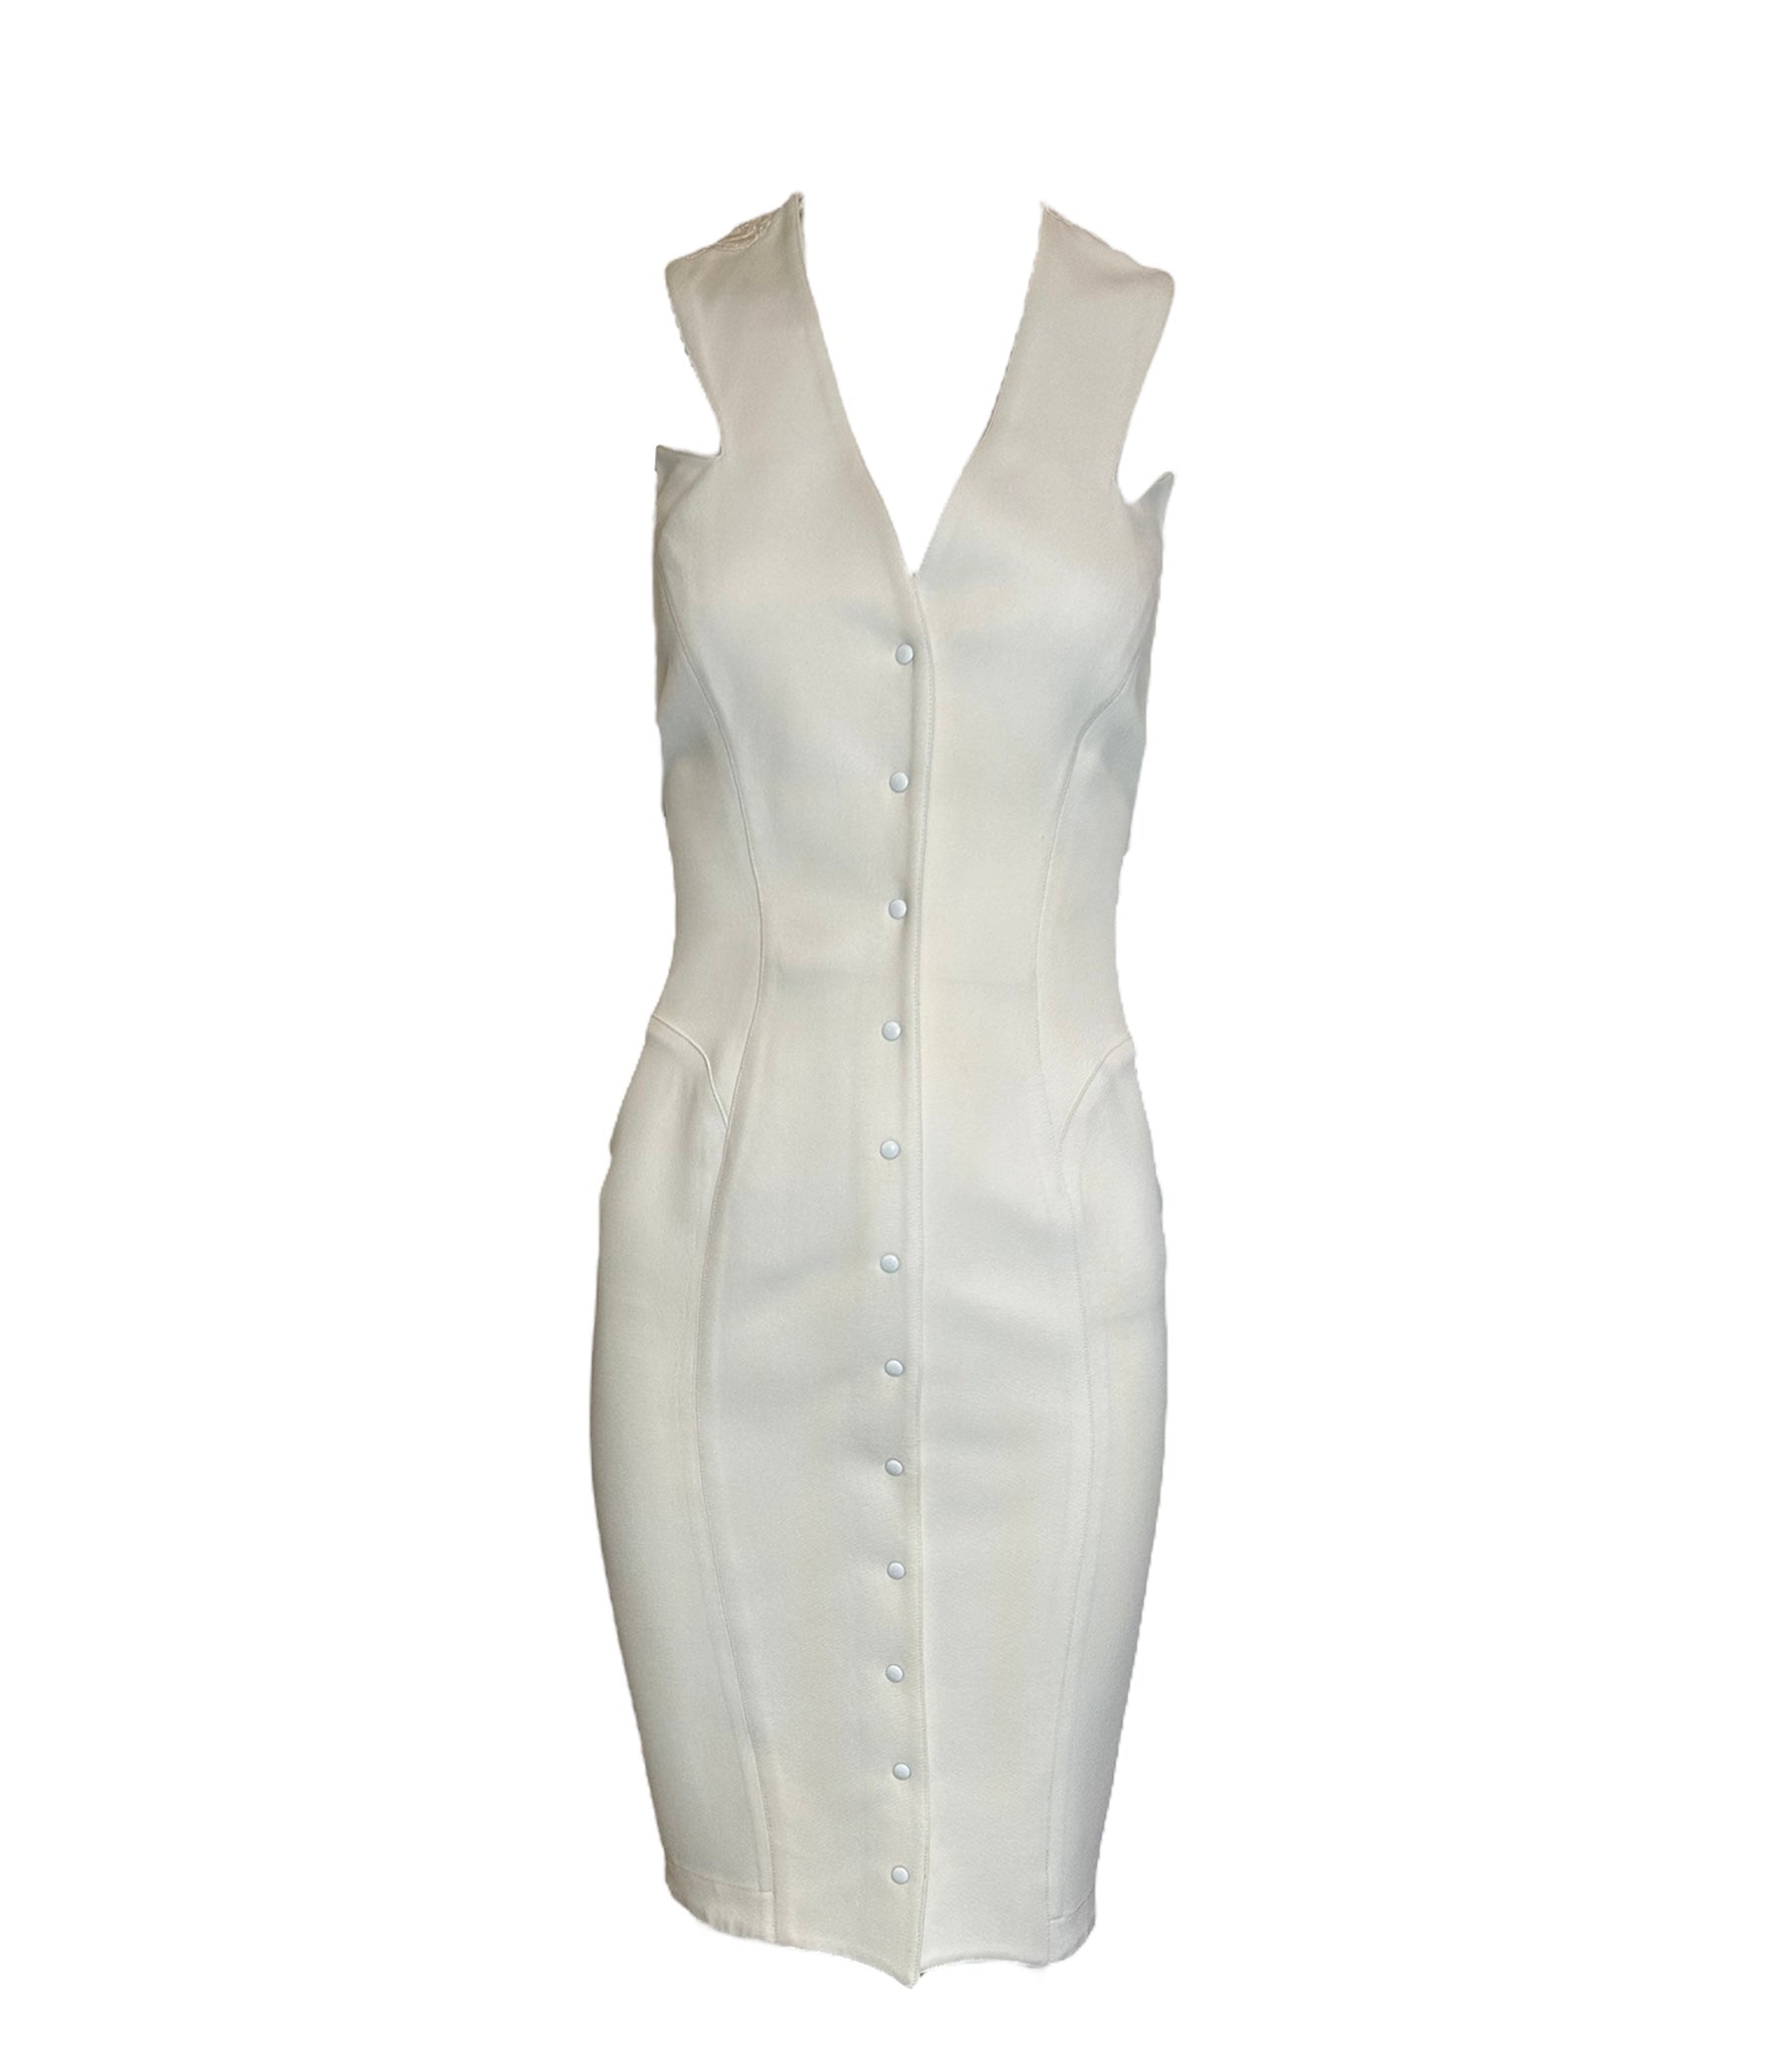 Mugler 80s White Crepe Dress with Snap Front and Peekaboo Back FRONT PHOTO 1 OF 4